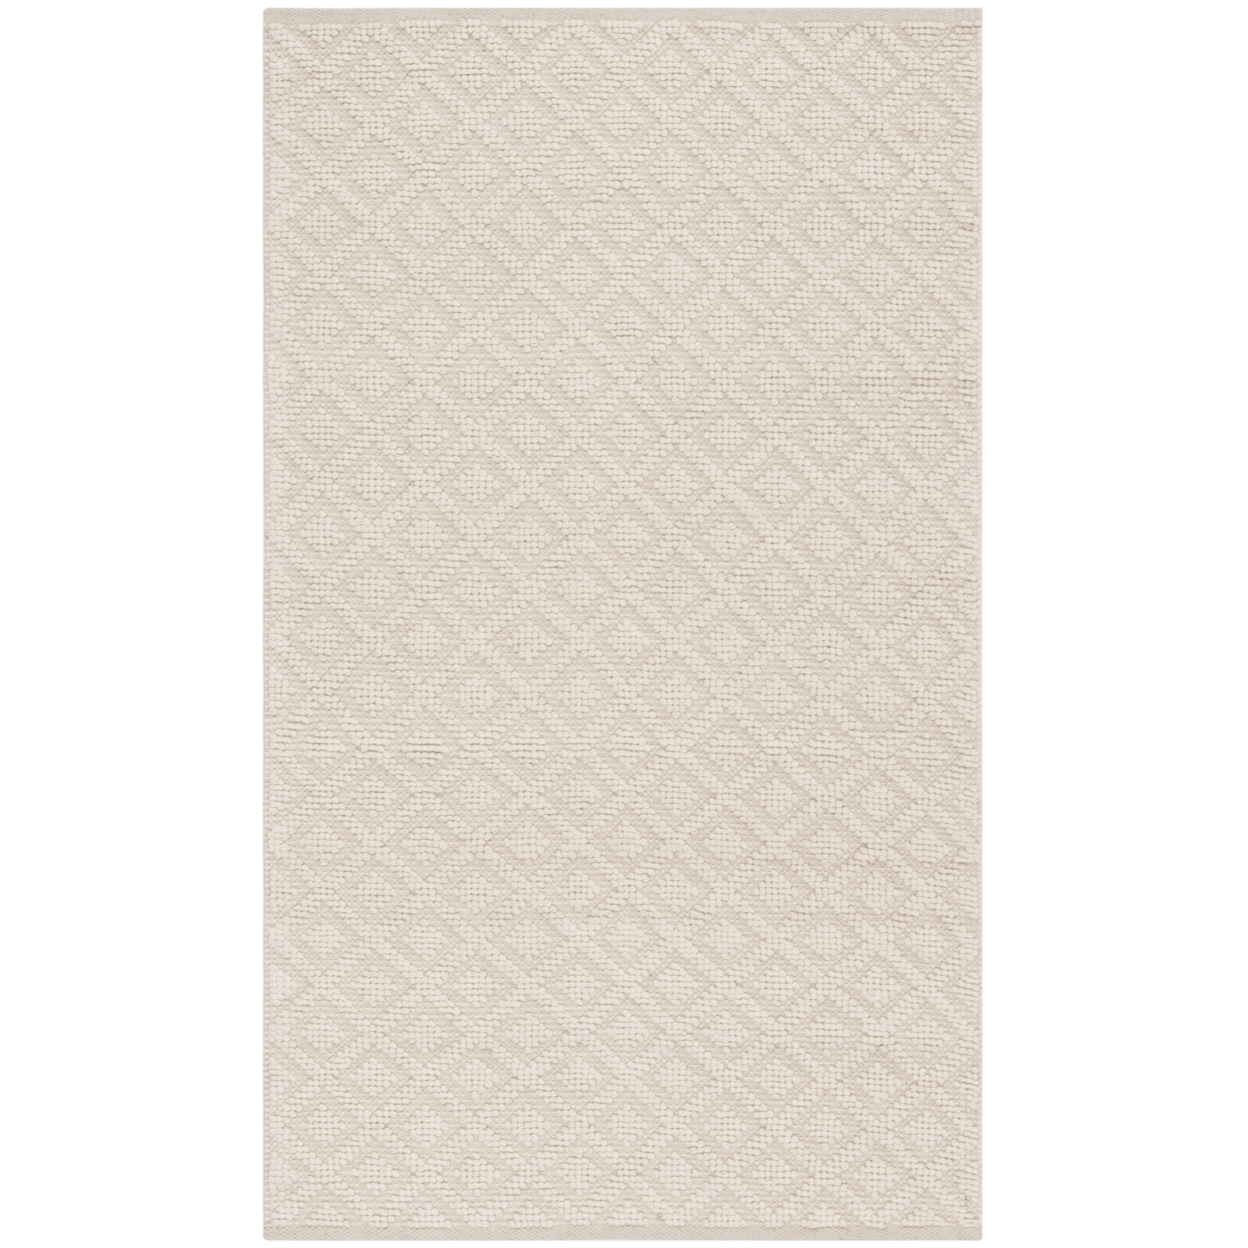 SAFAVIEH Vermont Collection VRM104A Handwoven Ivory Rug - 6 X 6 Square